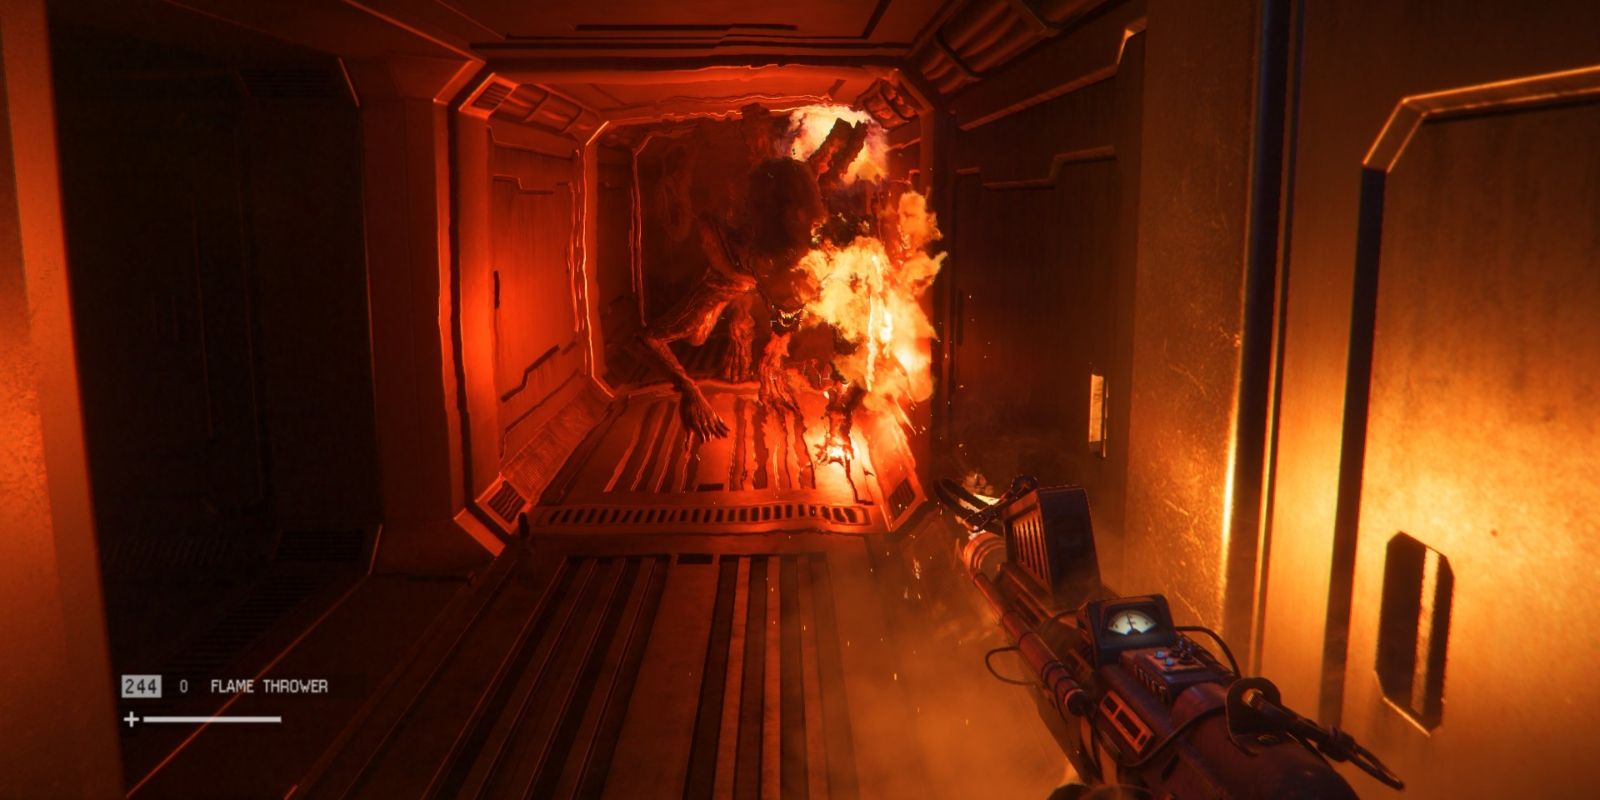 Why The Alien: Isolation Flamethrower Breaks The Game.